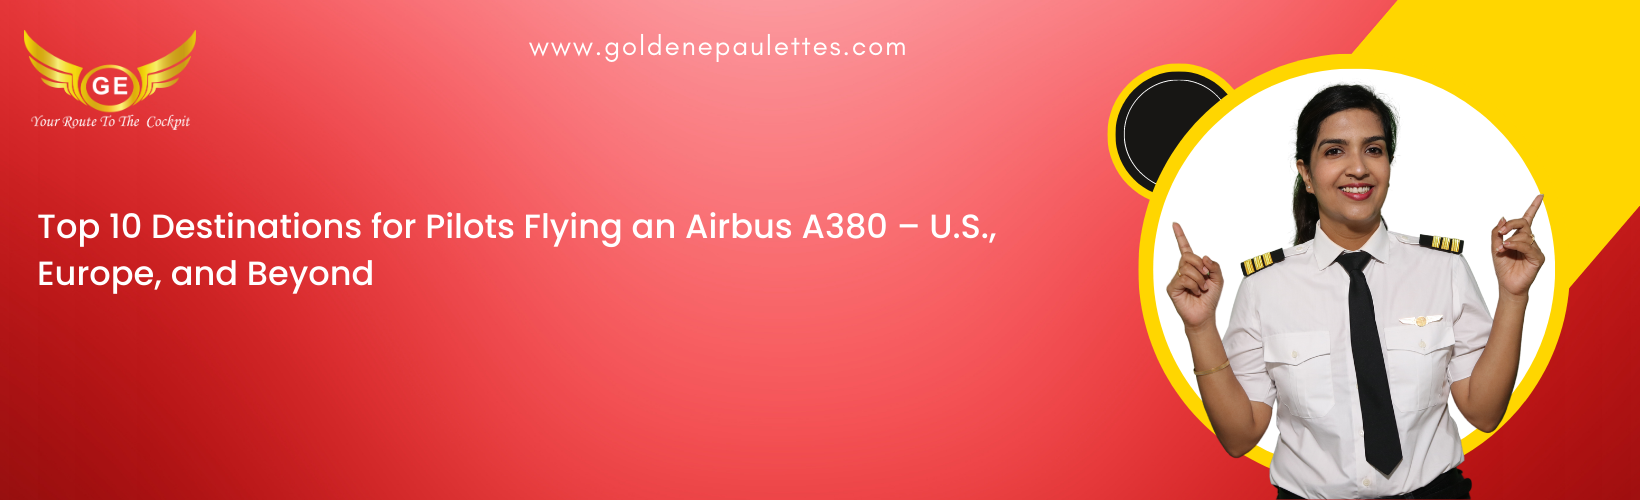 Popular Destinations for Pilots Flying an Airbus A380